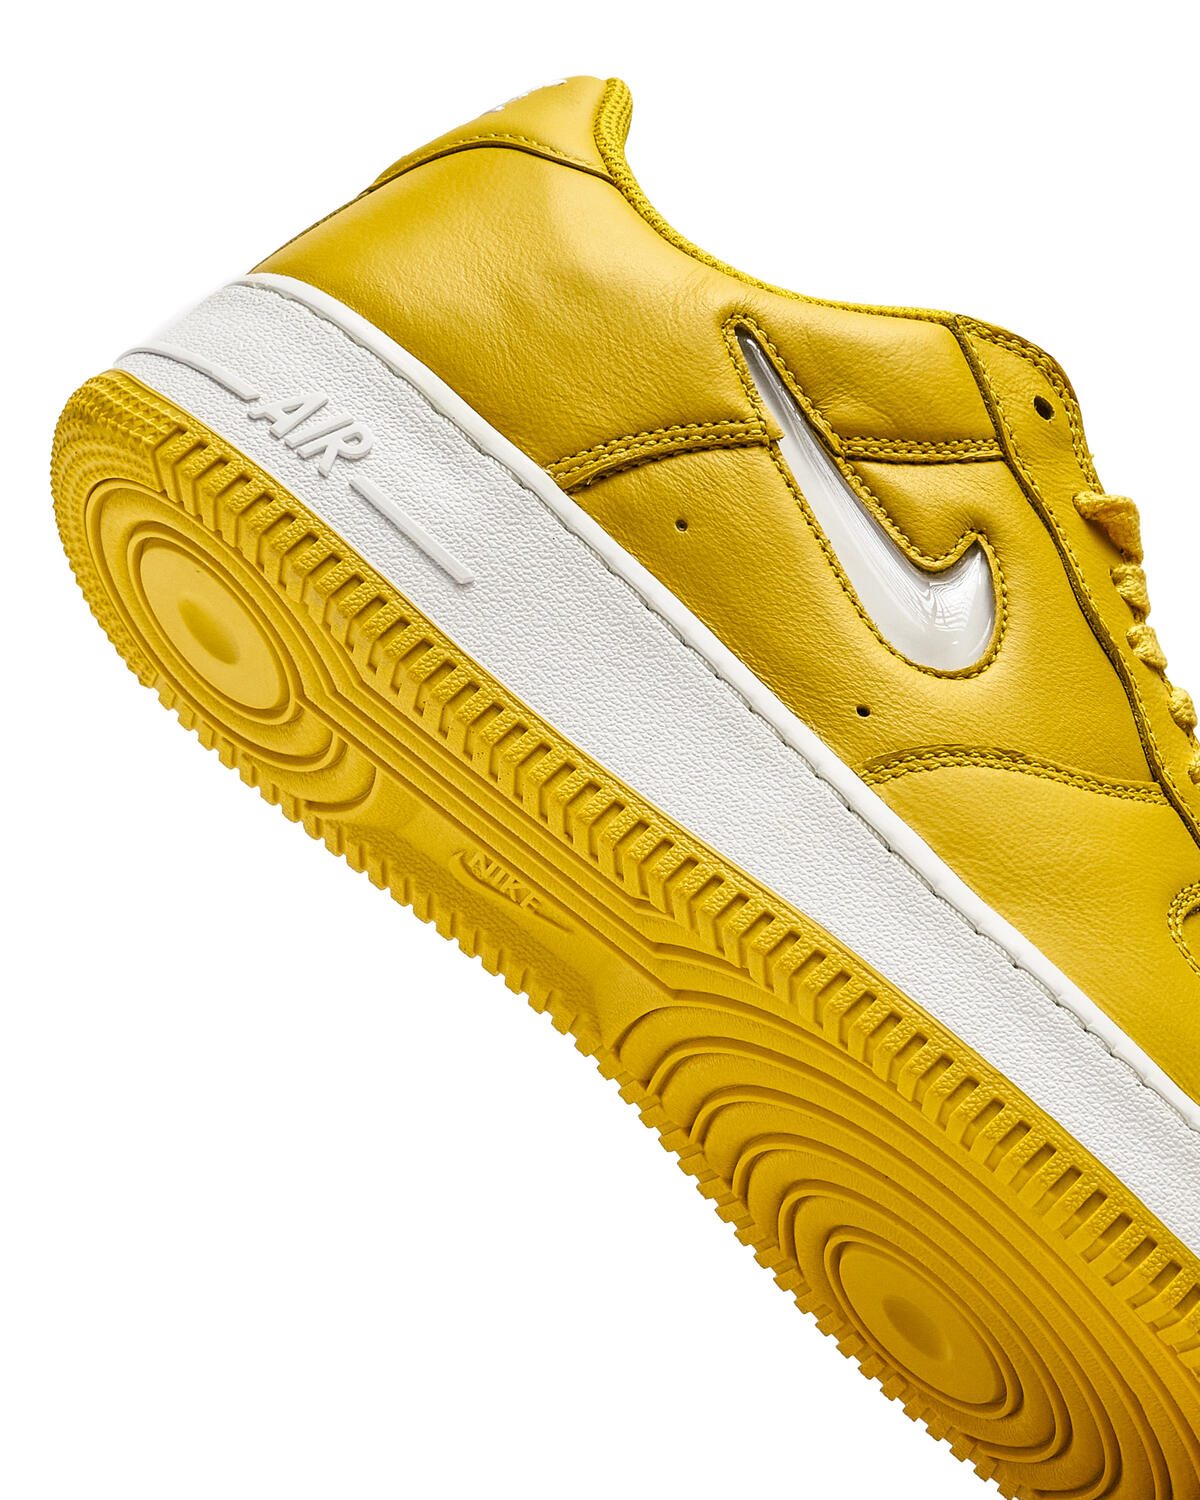 Nike Air Force 1 Retro Low - Speed Yellow 11